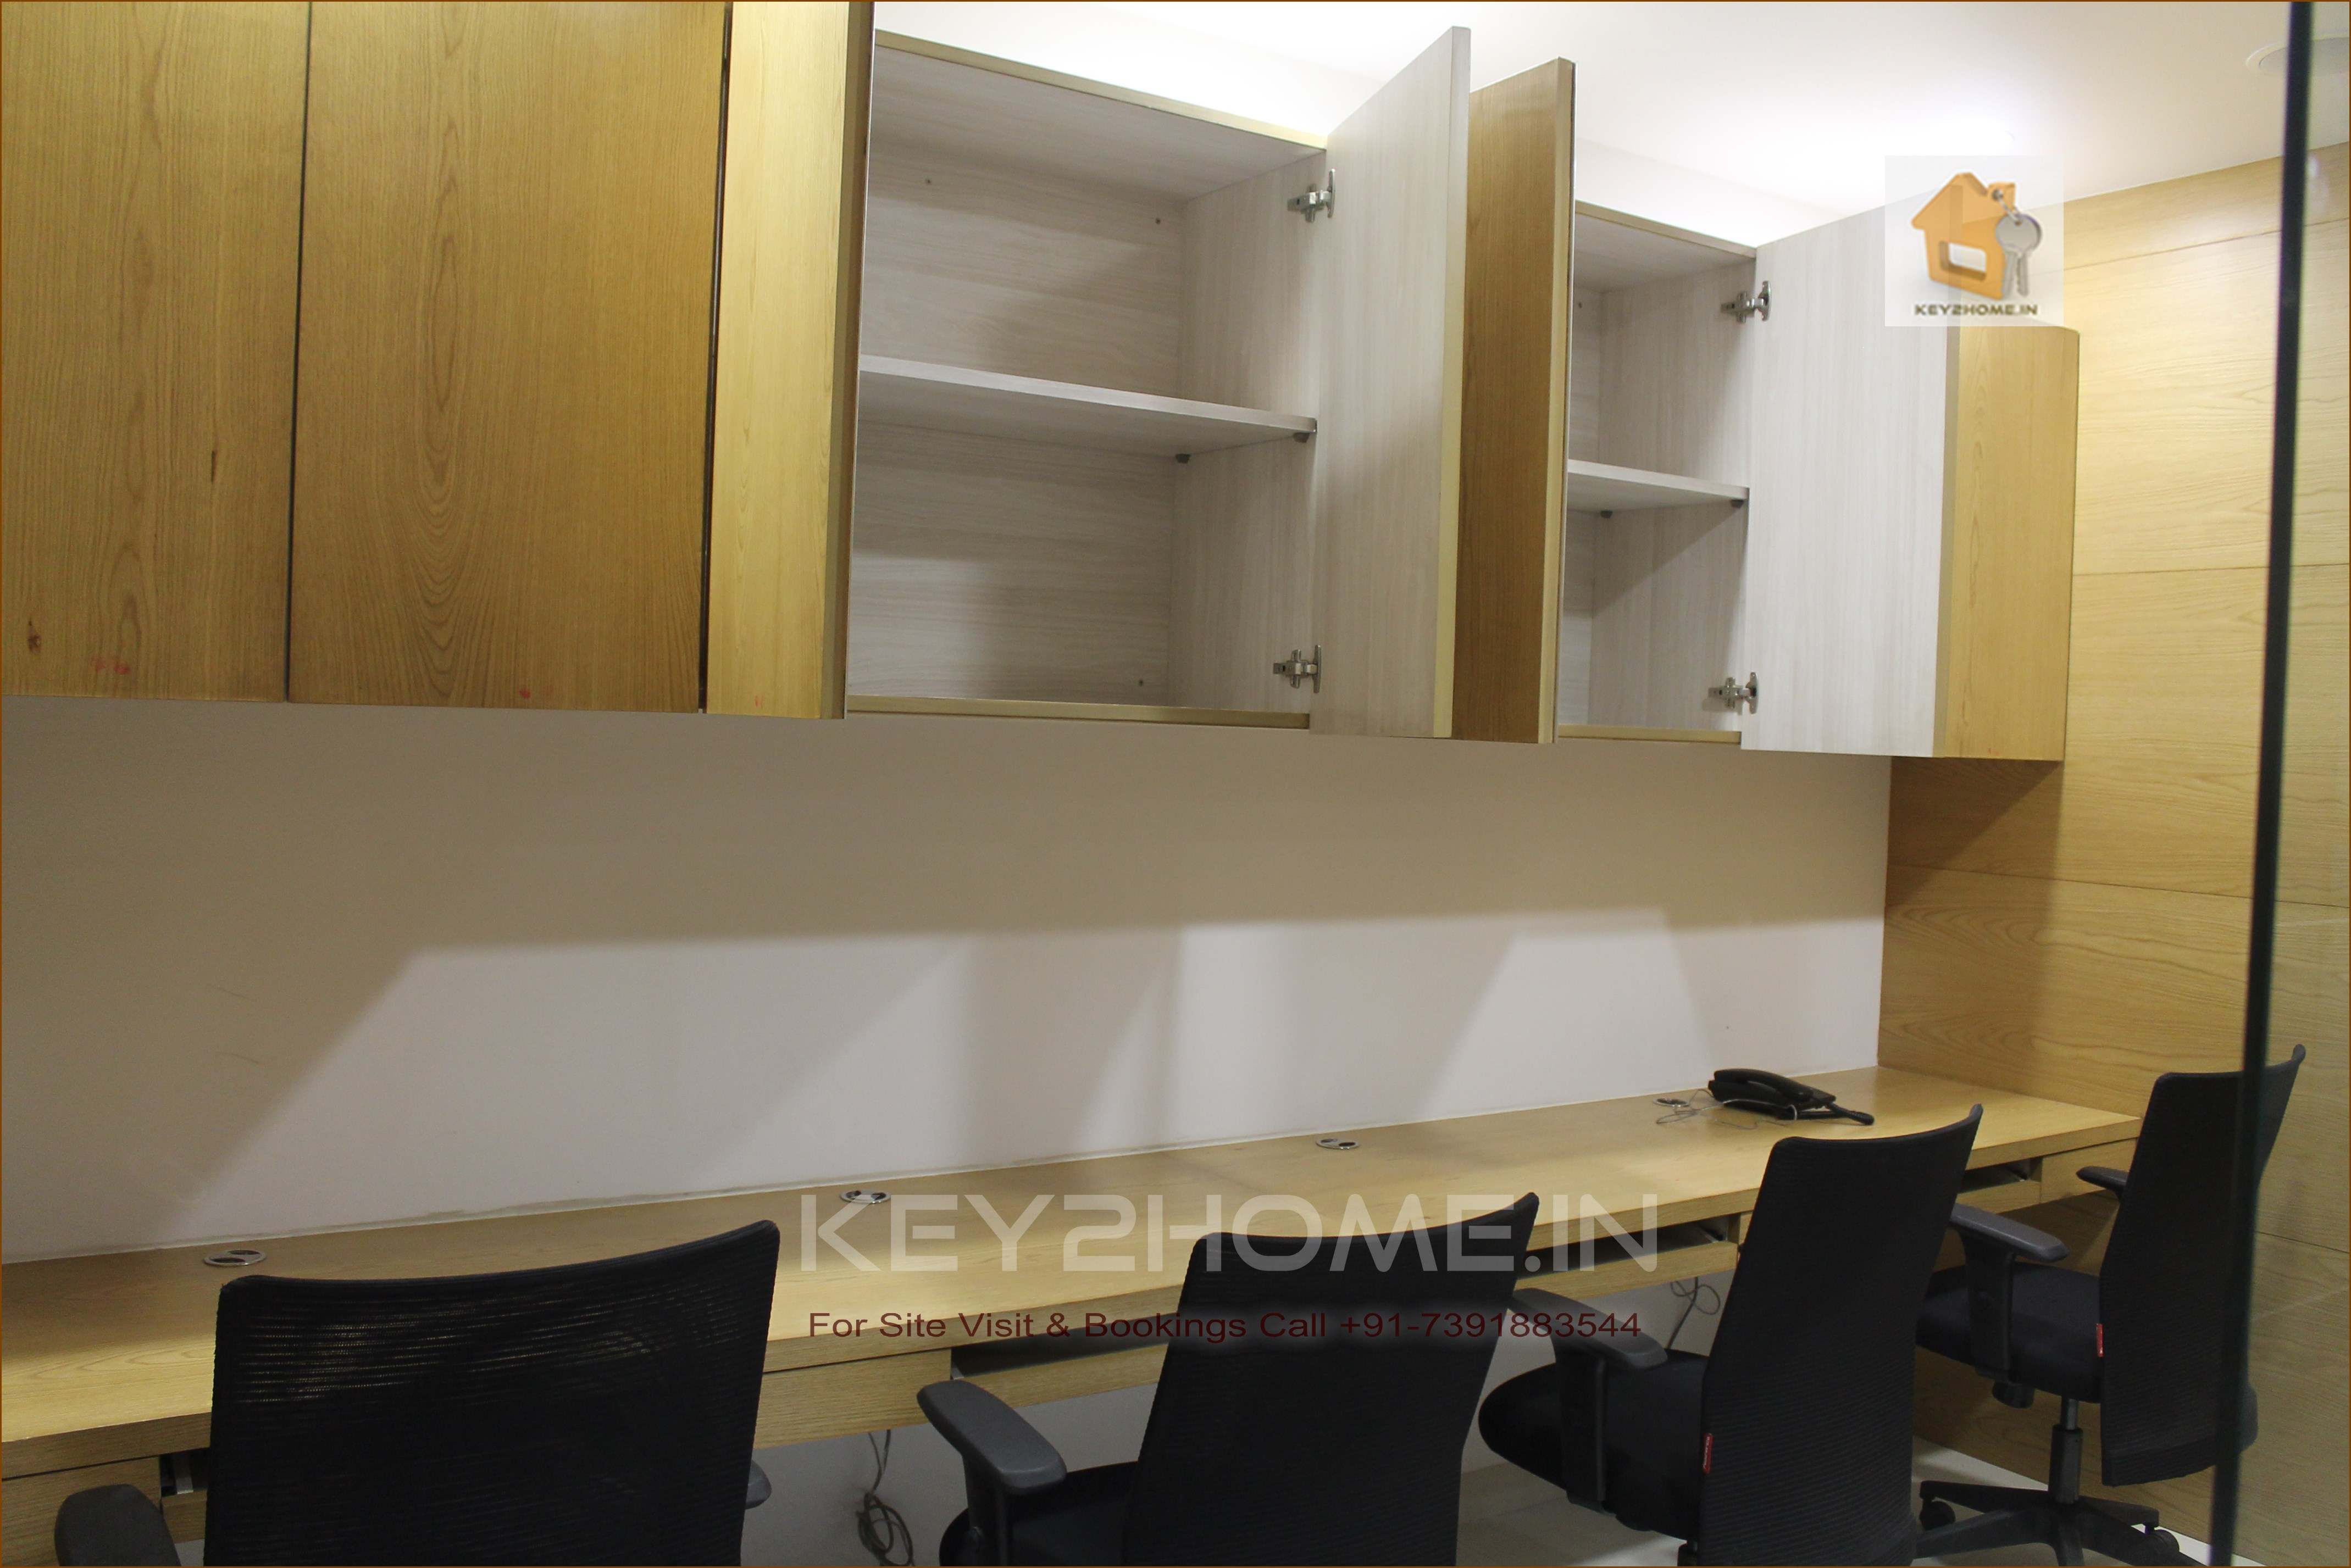 Commercial Office space on rent in Hinjewadi near wakad bridge Emplyee workstations